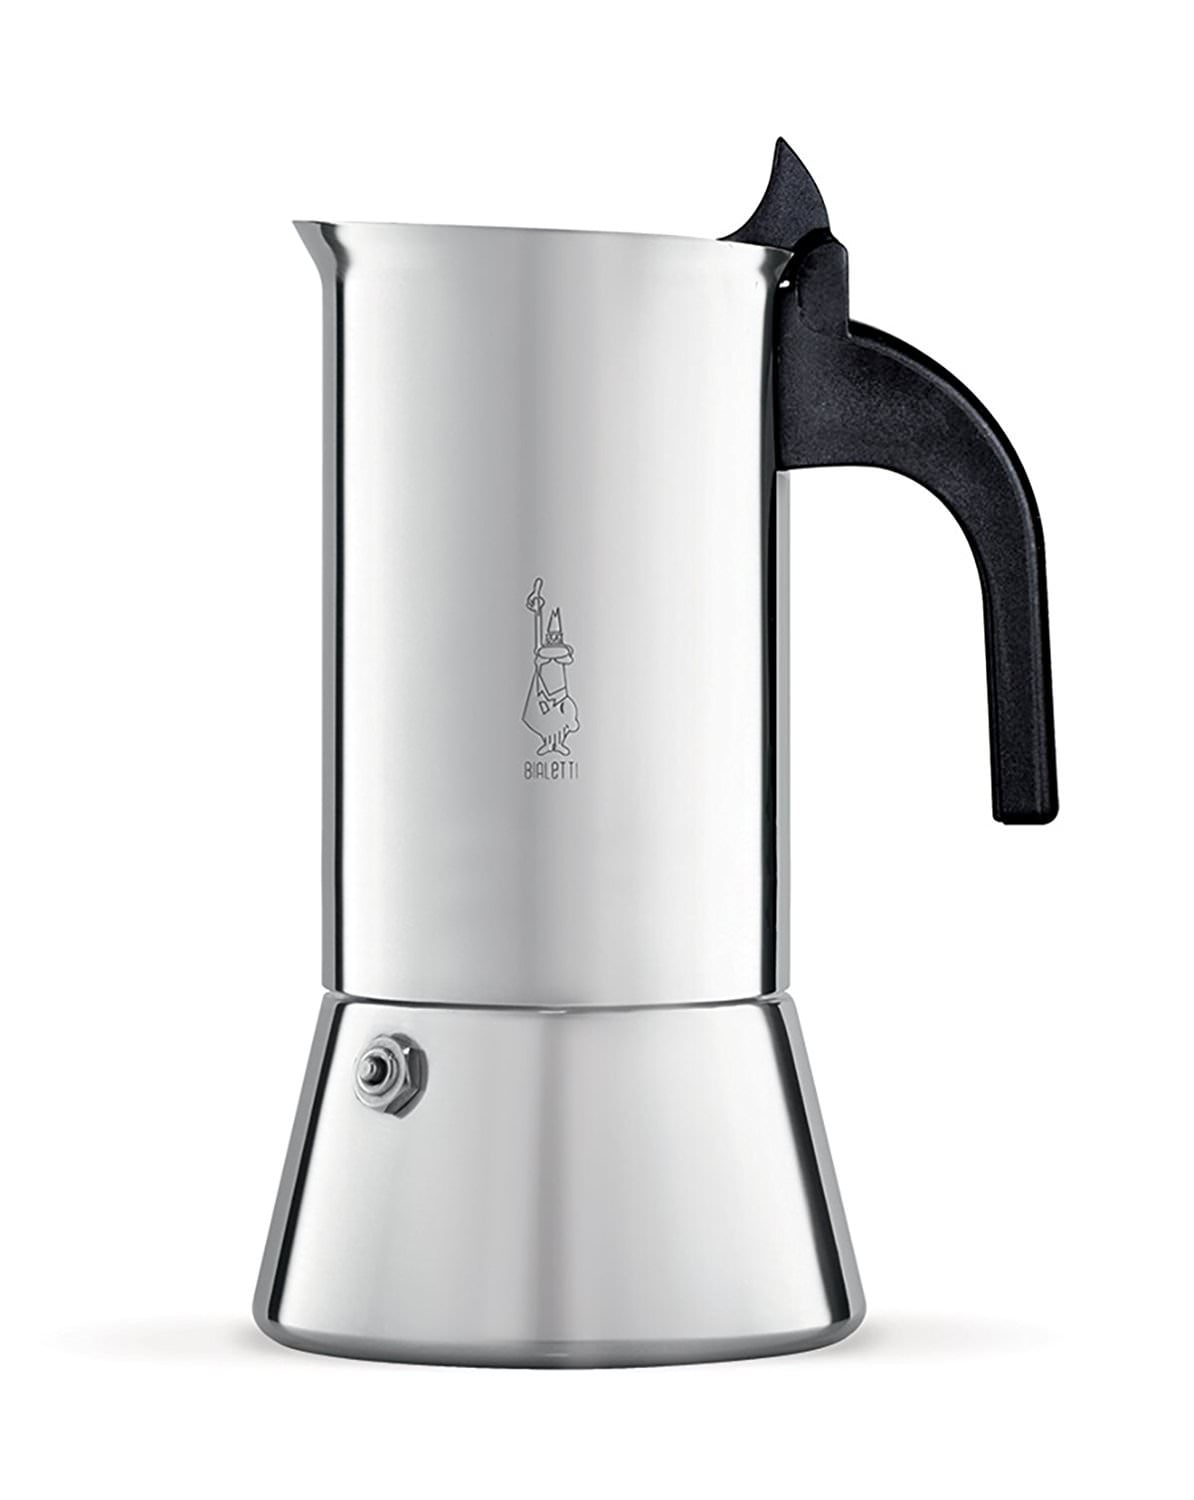 Bialetti Venus Stainless Steel Stovetop Espresso Coffee Maker, 6-Cup 